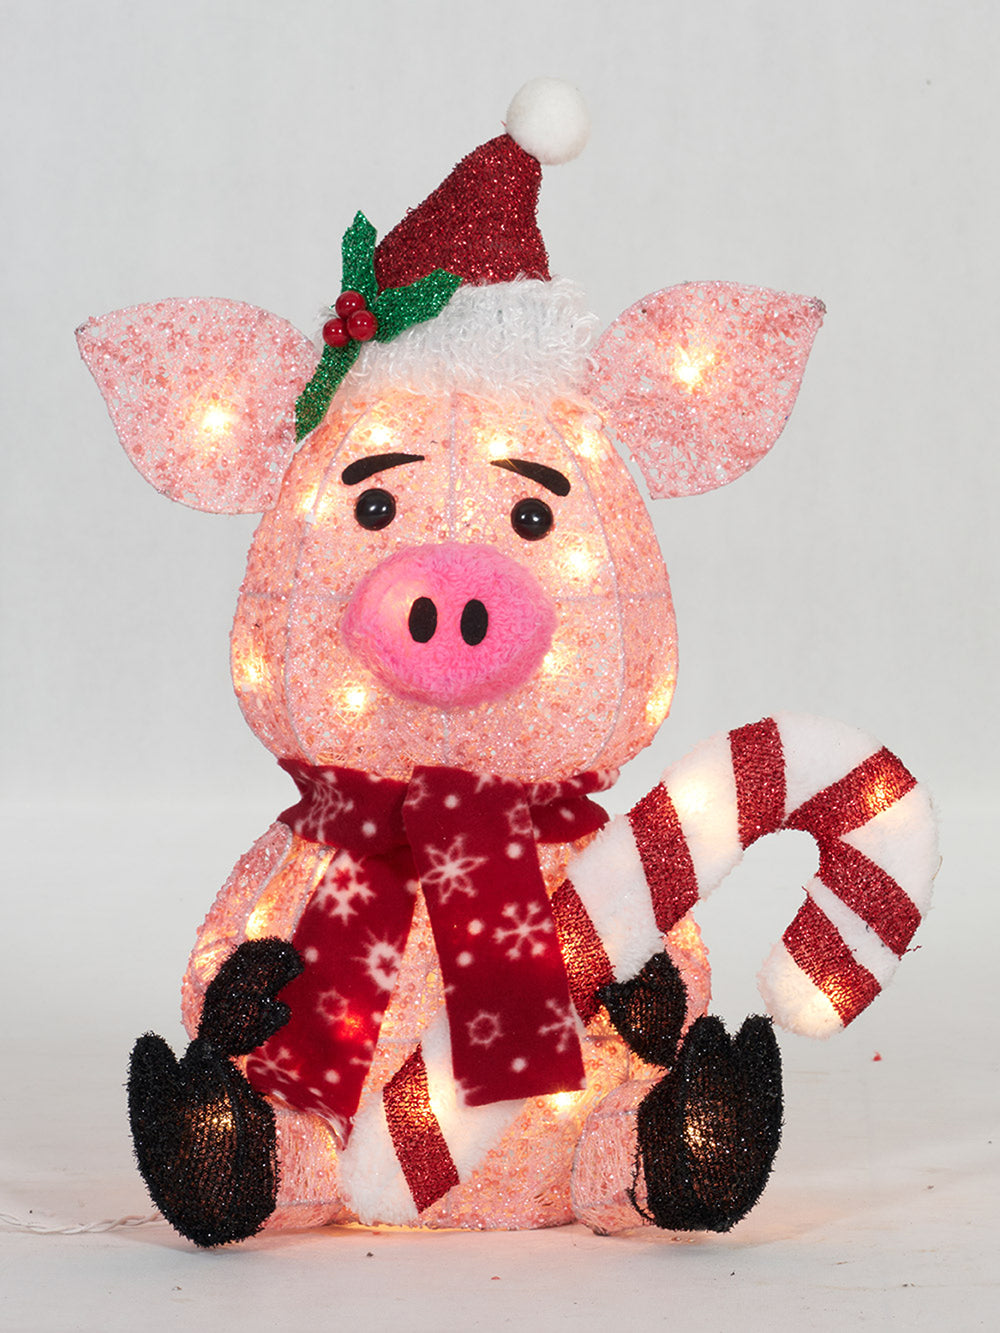 20" UL Glittering Thread Pig With Candy Cane Sculpture